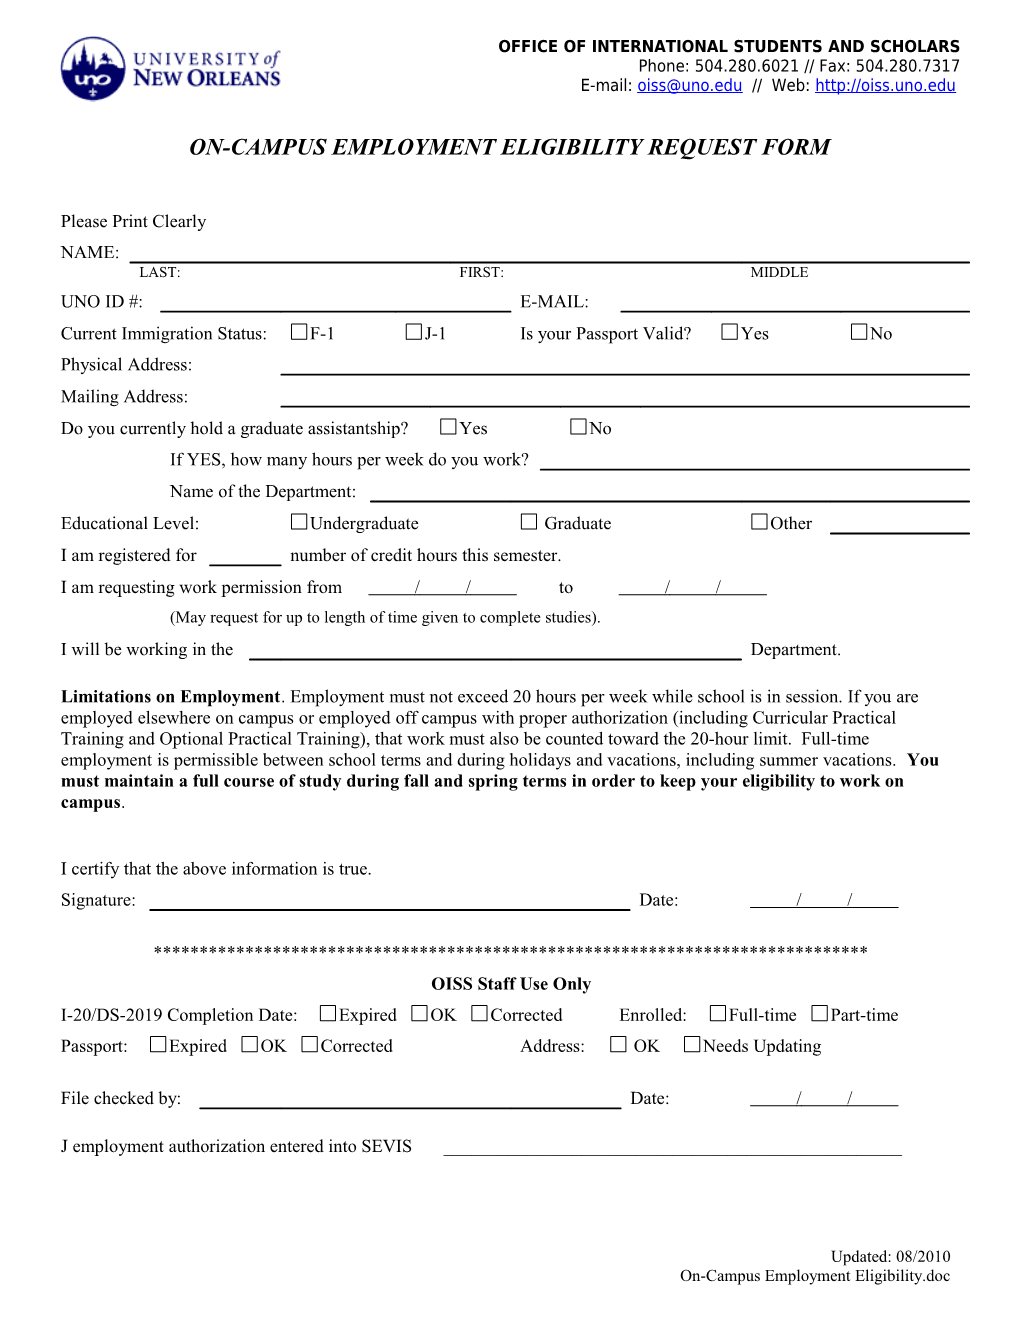 On-Campus Employment Eligibility Request Form